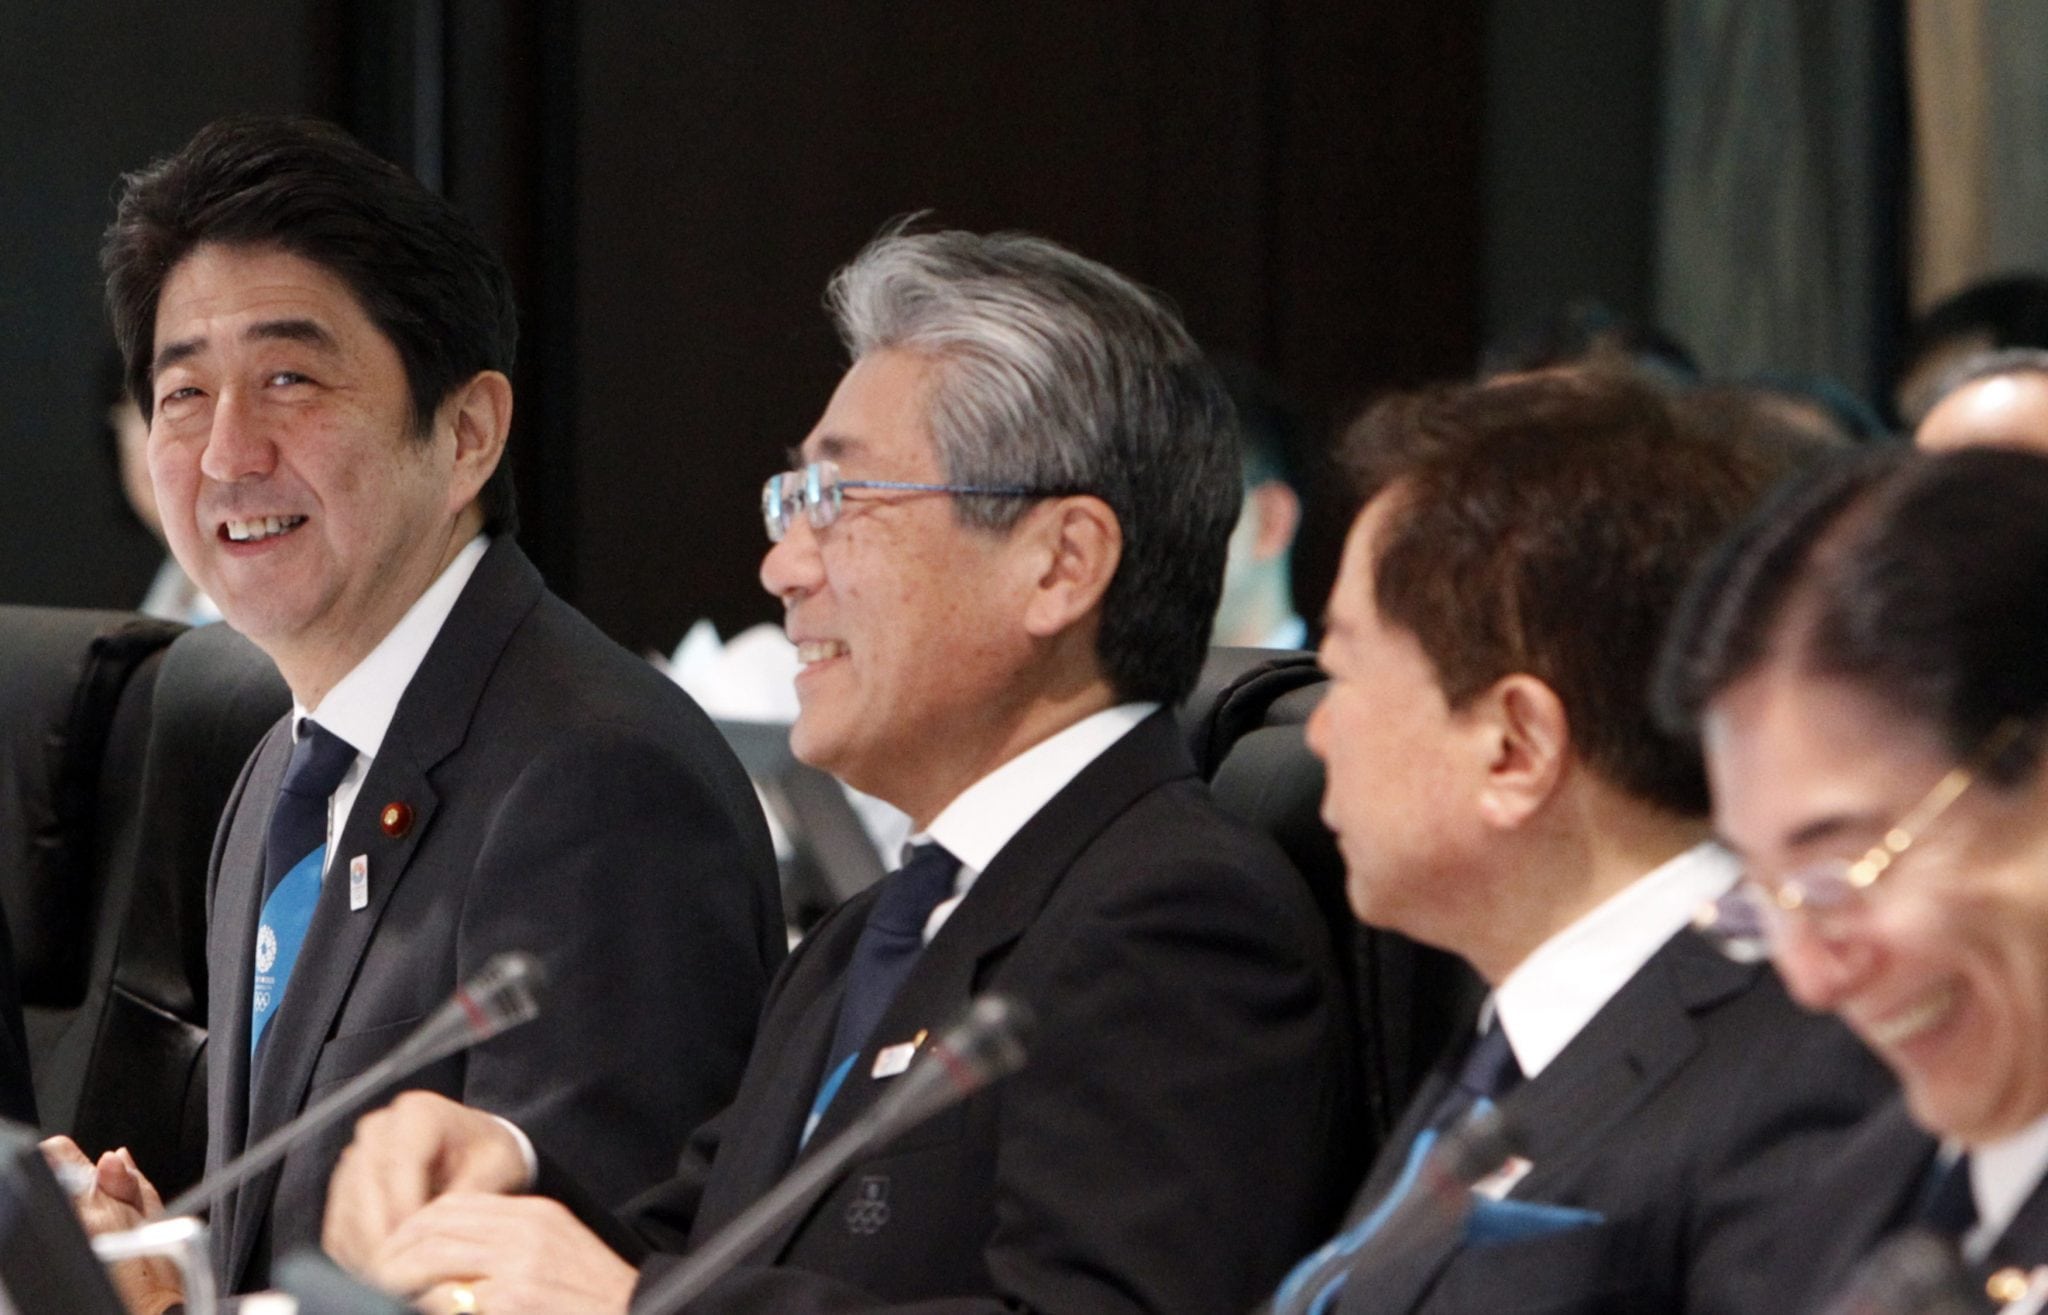 Japan's PM Abe, JOC President Tsunekazu Takeda and Tokyo Governor Inose attend welcoming event ahead of presentation of Tokyo 2020 bid to host Summer Olympics to IOC Evaluation Commission in Tokyo. 